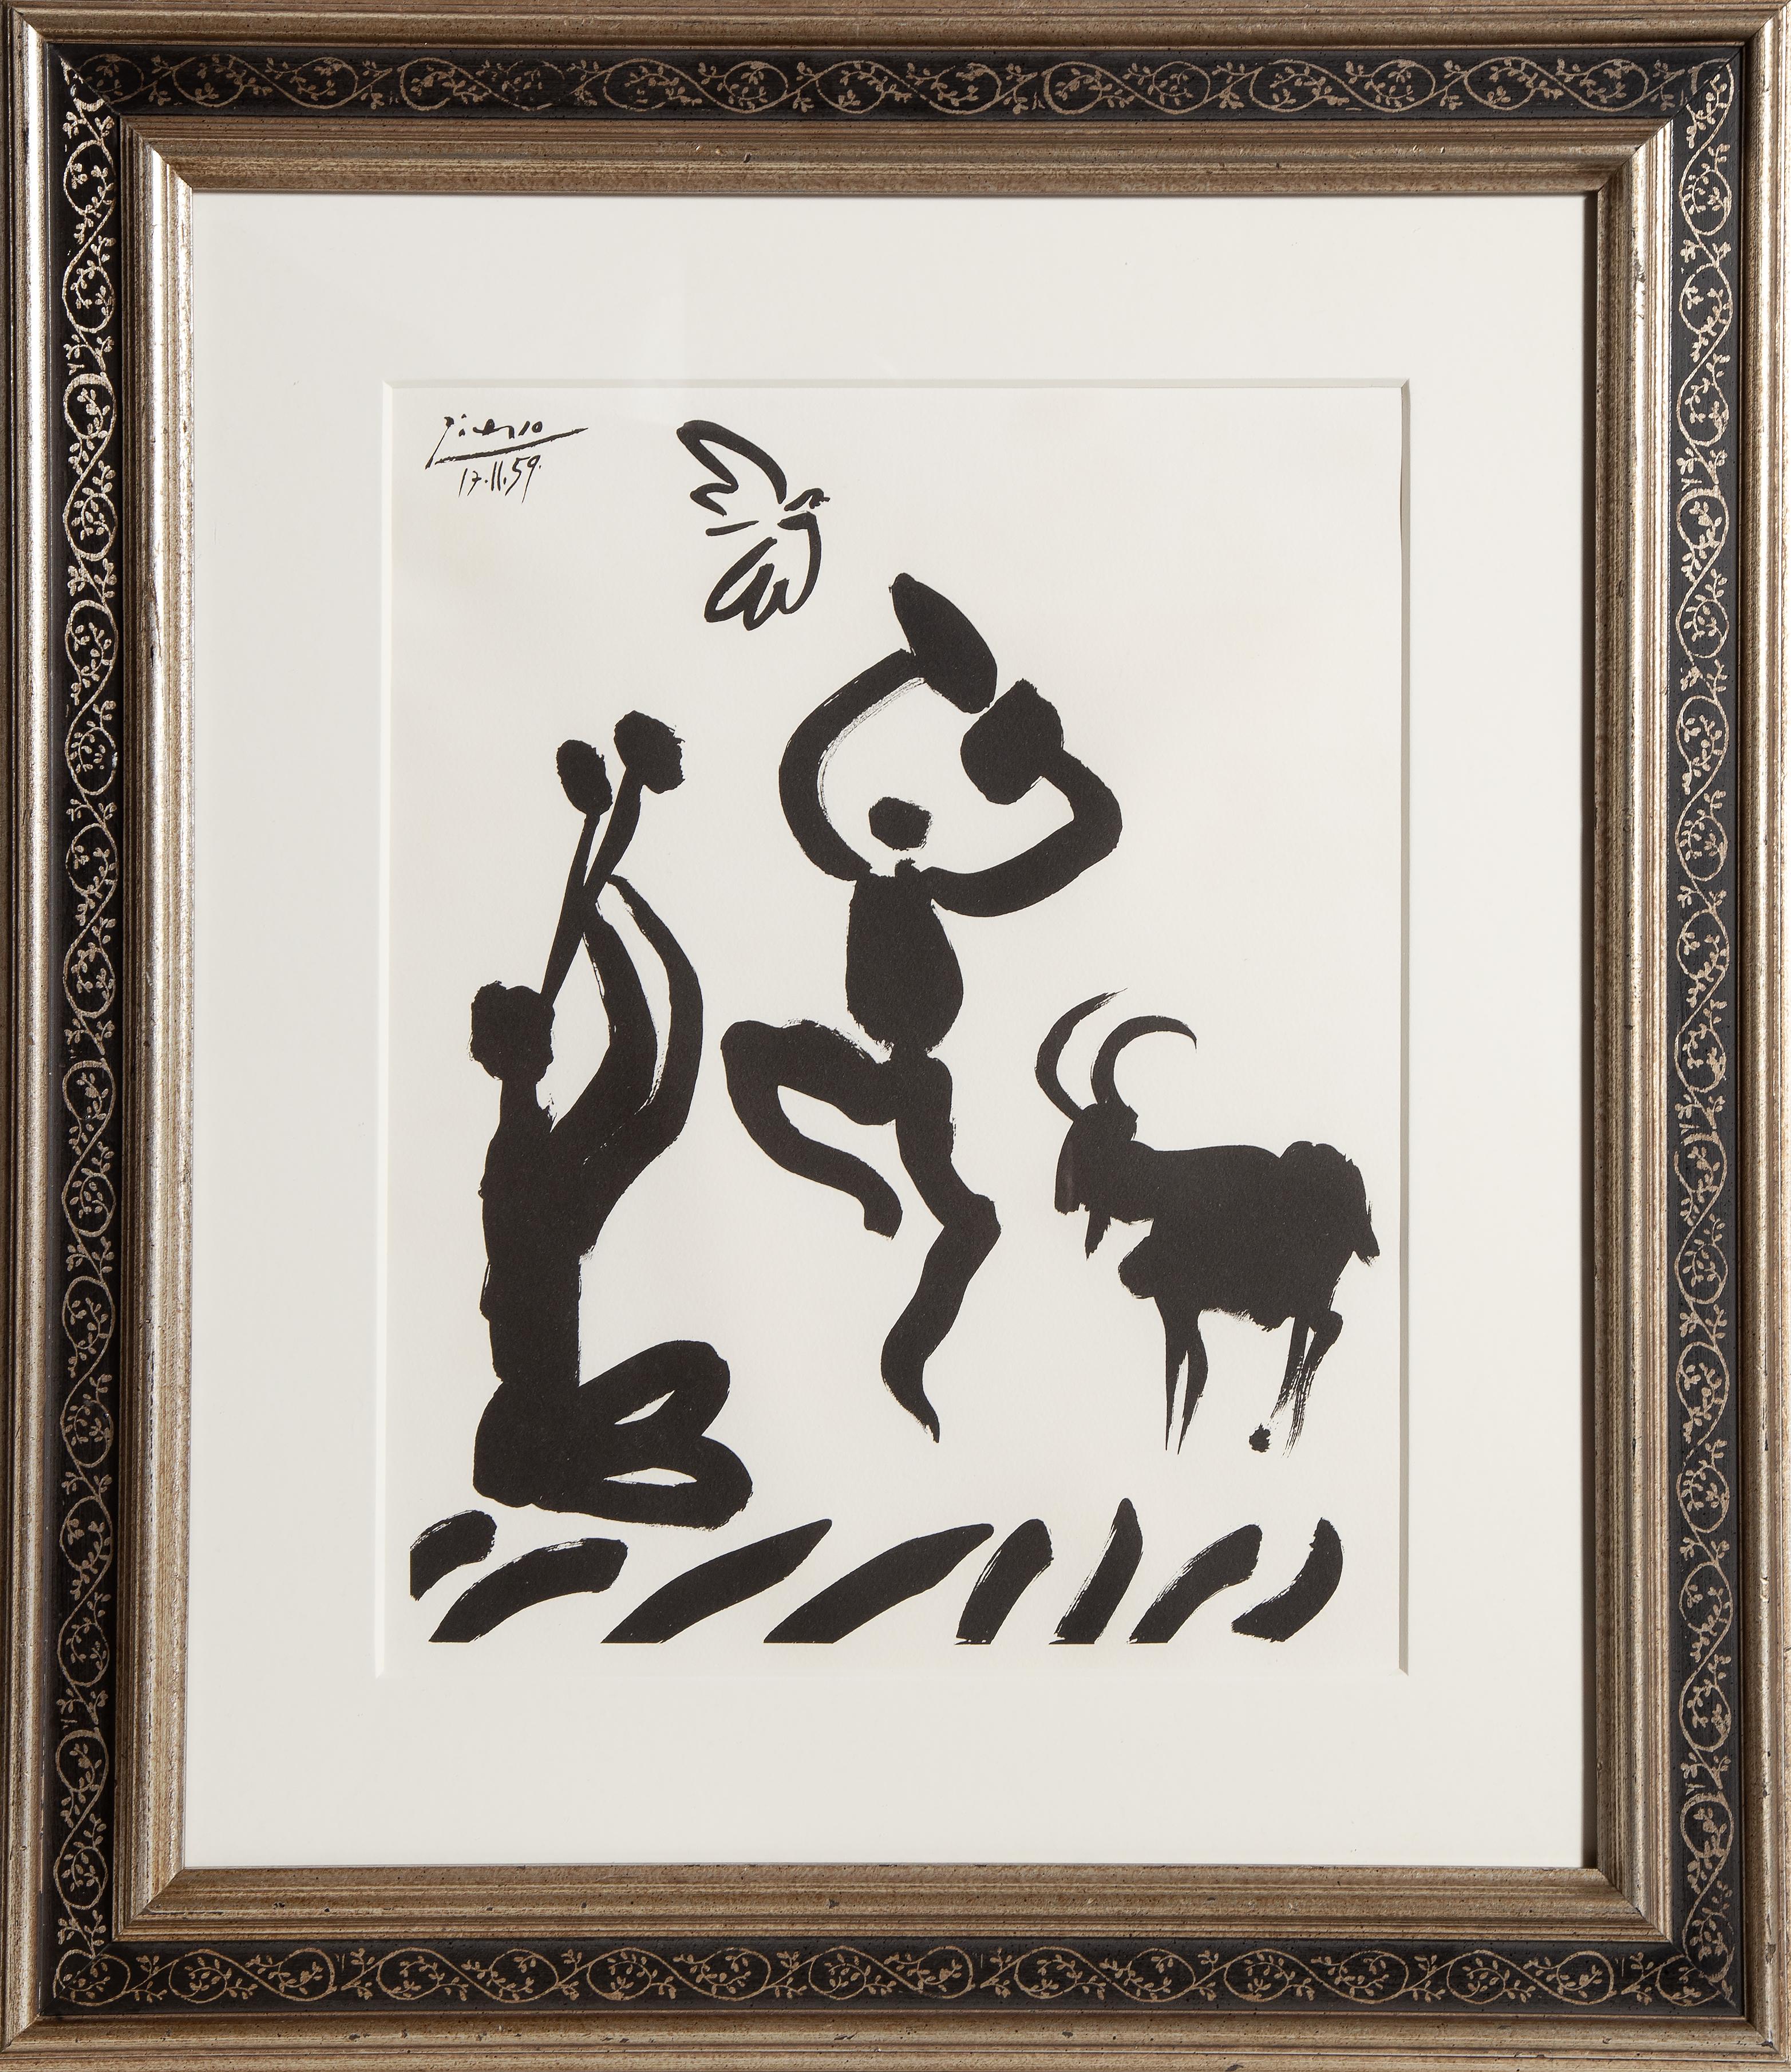 Joueur de flûte et faune after Pablo Picasso, Spanish (1881–1973)
Date: 1959
Lithograph on Wove Paper, signed and dated in the plate
Sight: 18 x 14.5 in. (45.72 x 36.83 cm)
Frame Size: 29.5 x 25.5 inches
Printer: Mourlot, Paris
Publisher: Editions